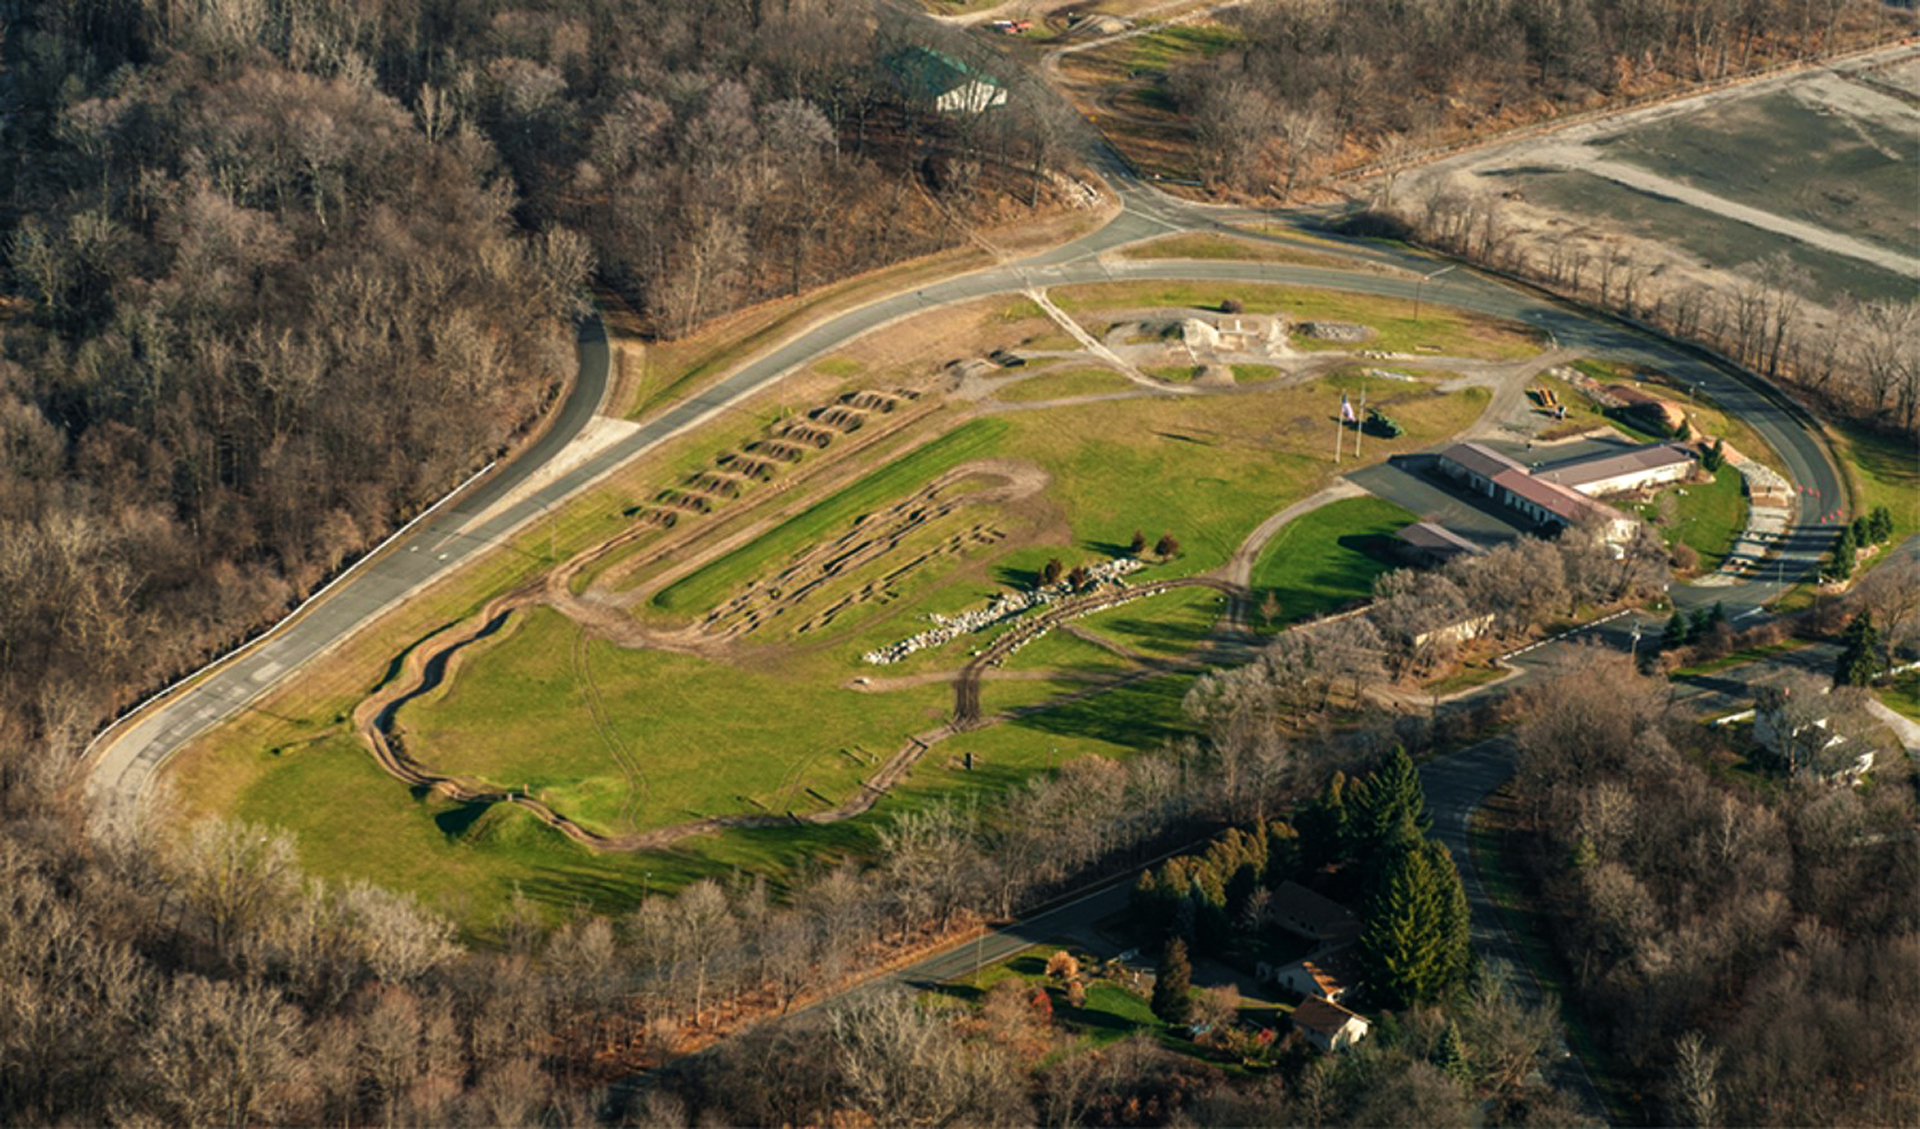 Aerial view of the AM General proving grounds in Mishawaka, IN